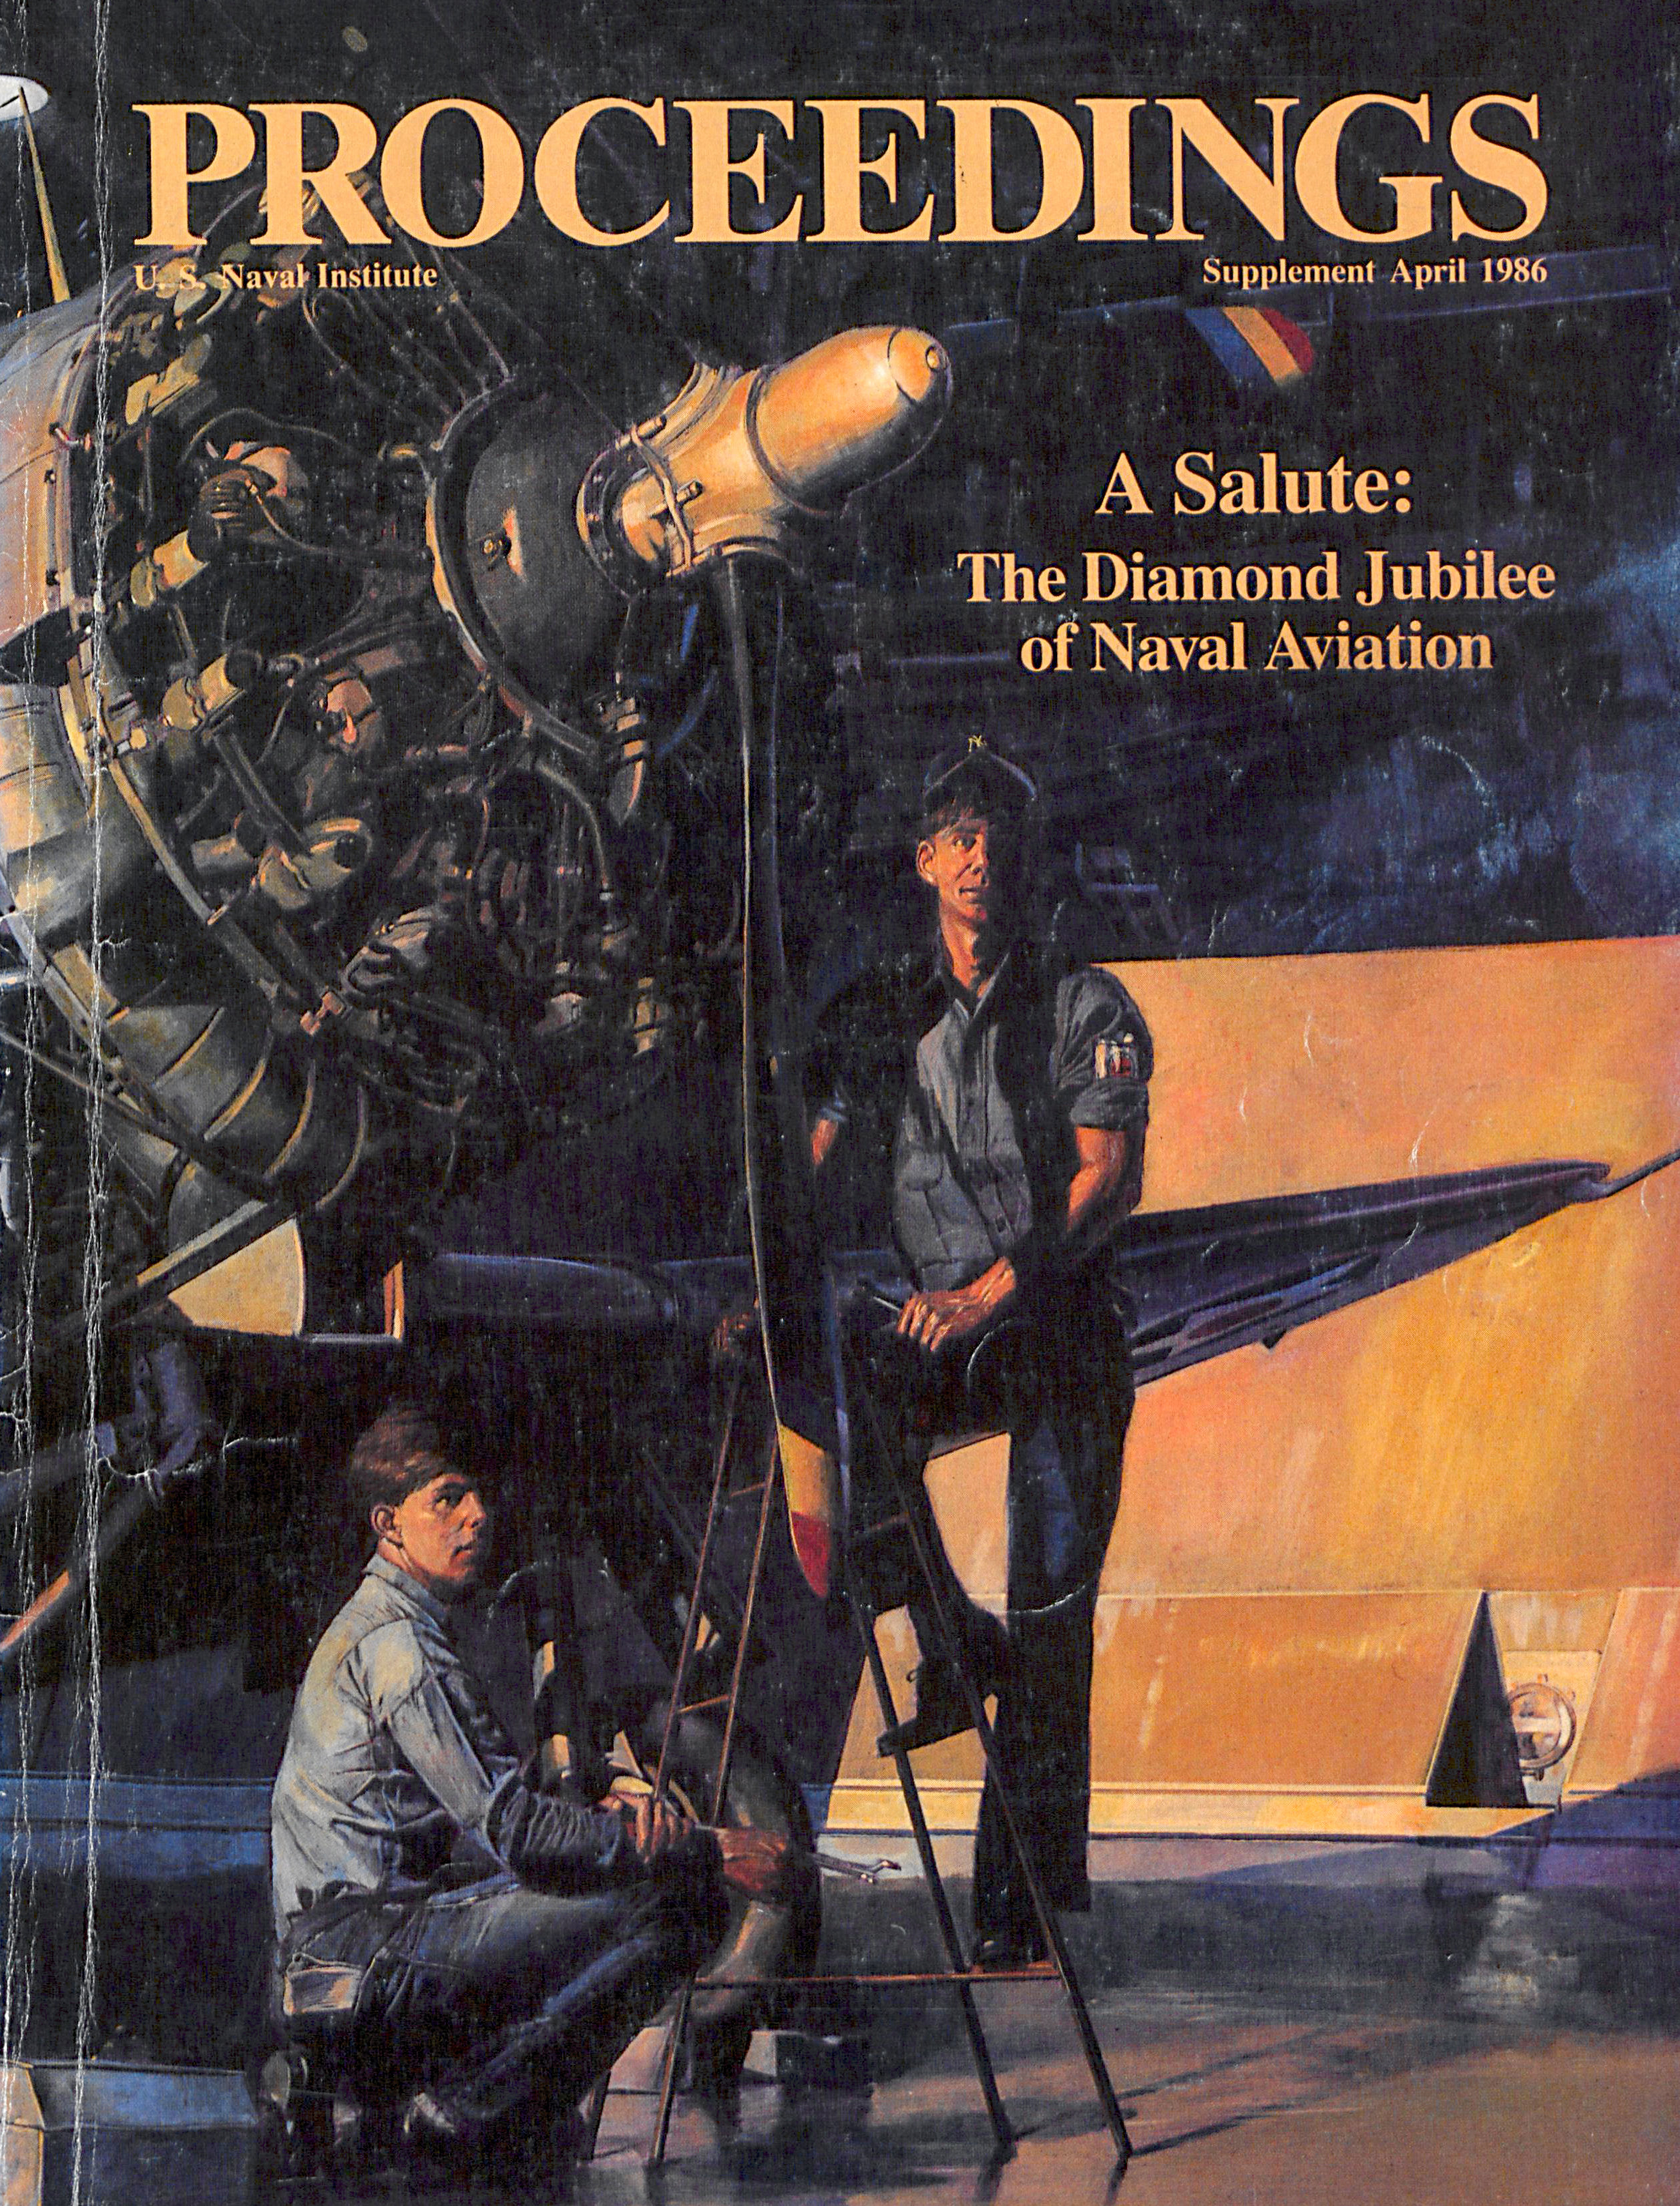 Proceedings - April 1986 Vol. 112/4/998 - The Diamond Jubilee of Naval Aviation Supplement Cover